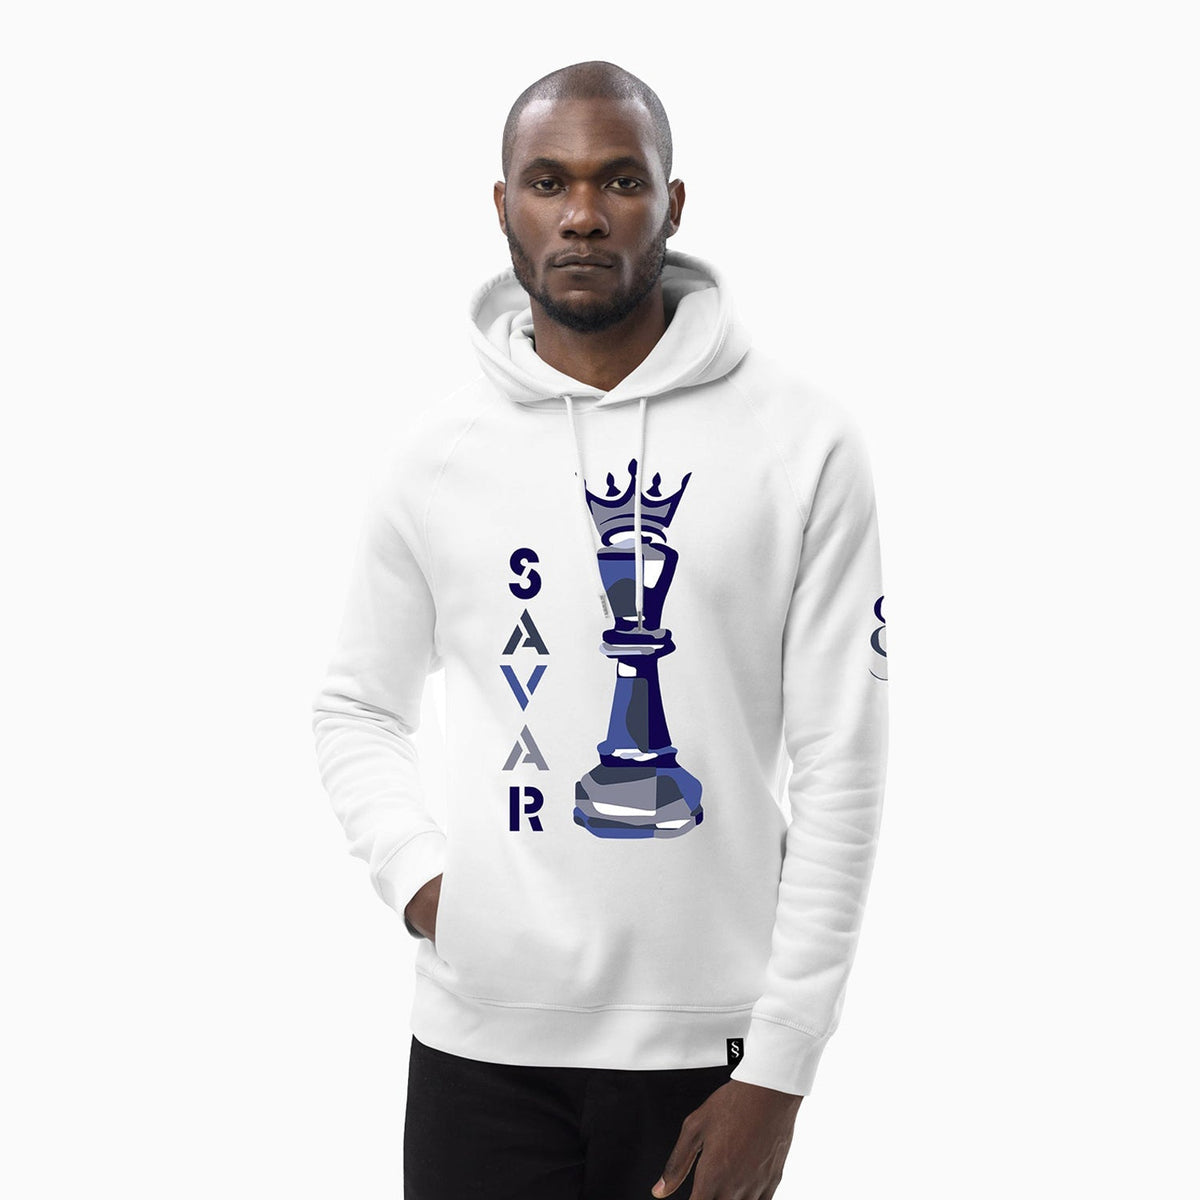 chess-design-printed-pull-over-hoodie-for-men-sh101-100